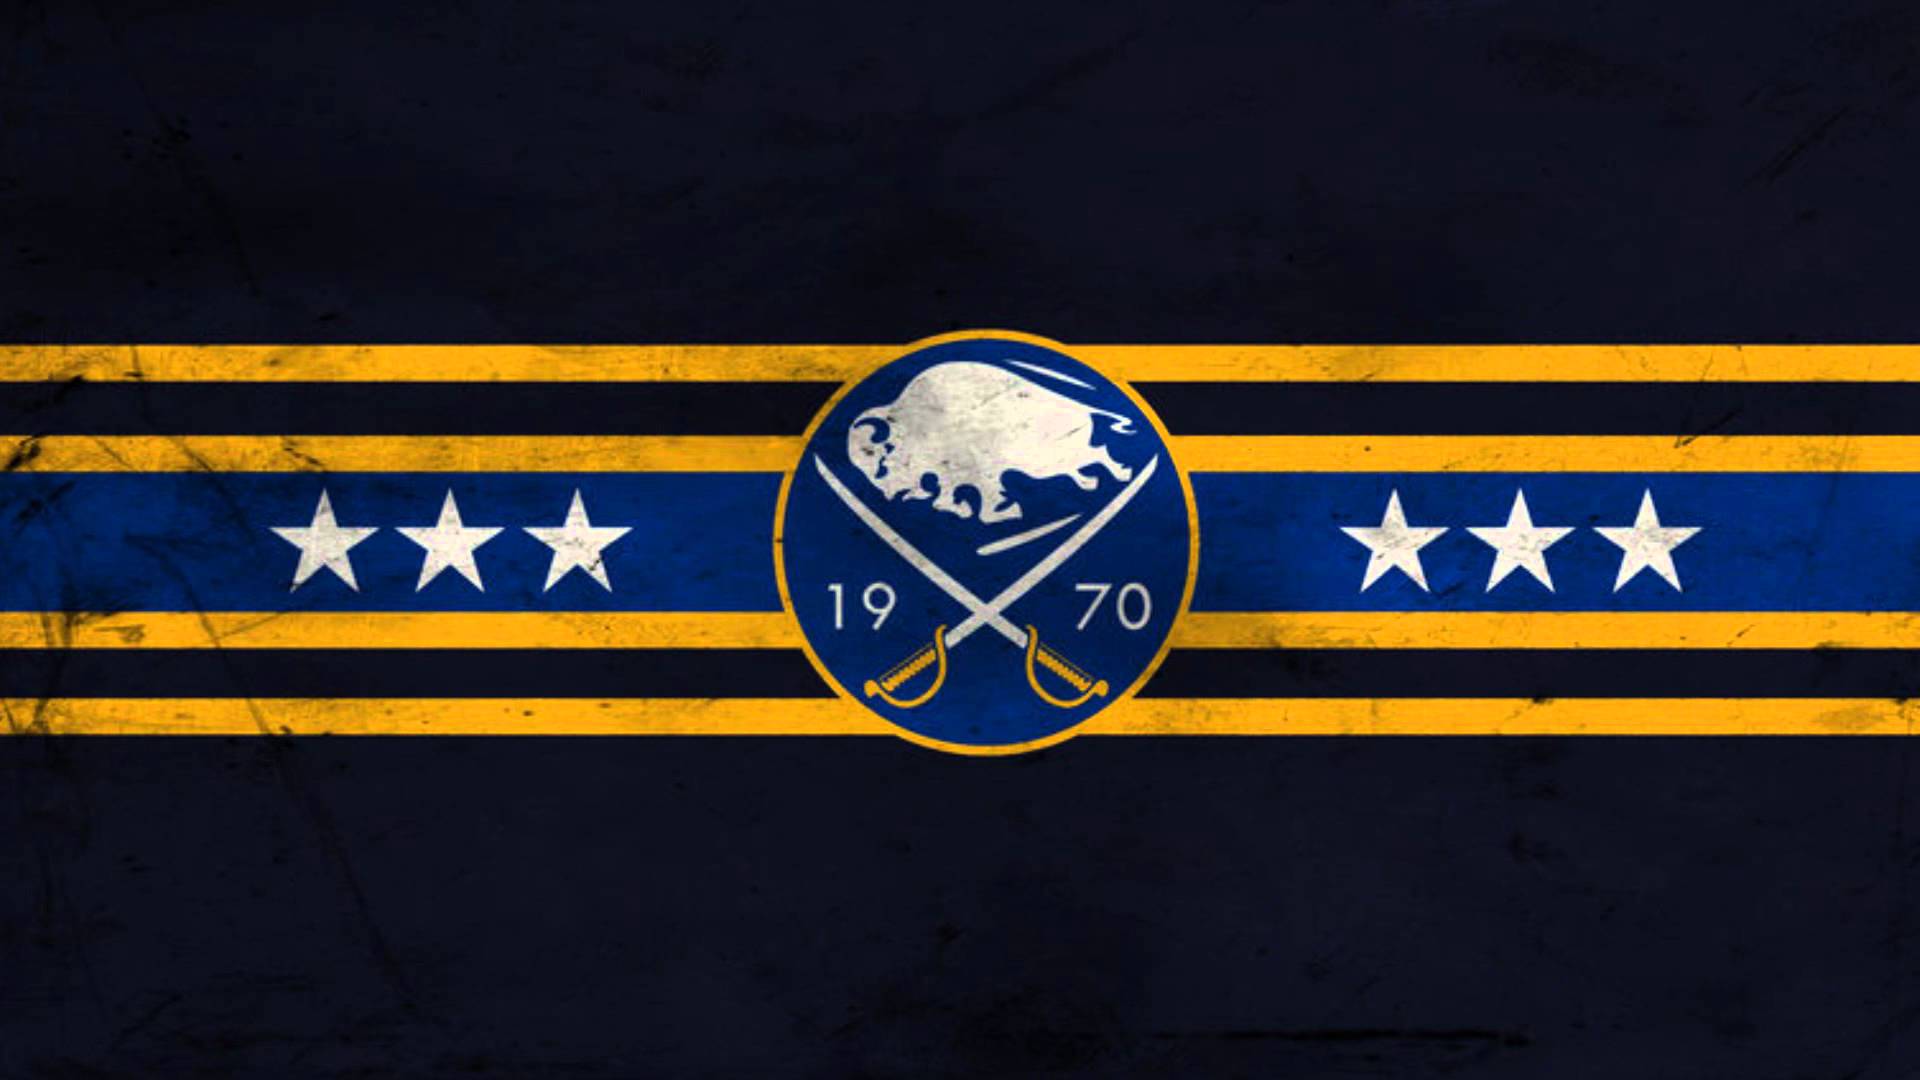 buffalo sabres wallpapers – 1920×1080 High Definition Wallpapers